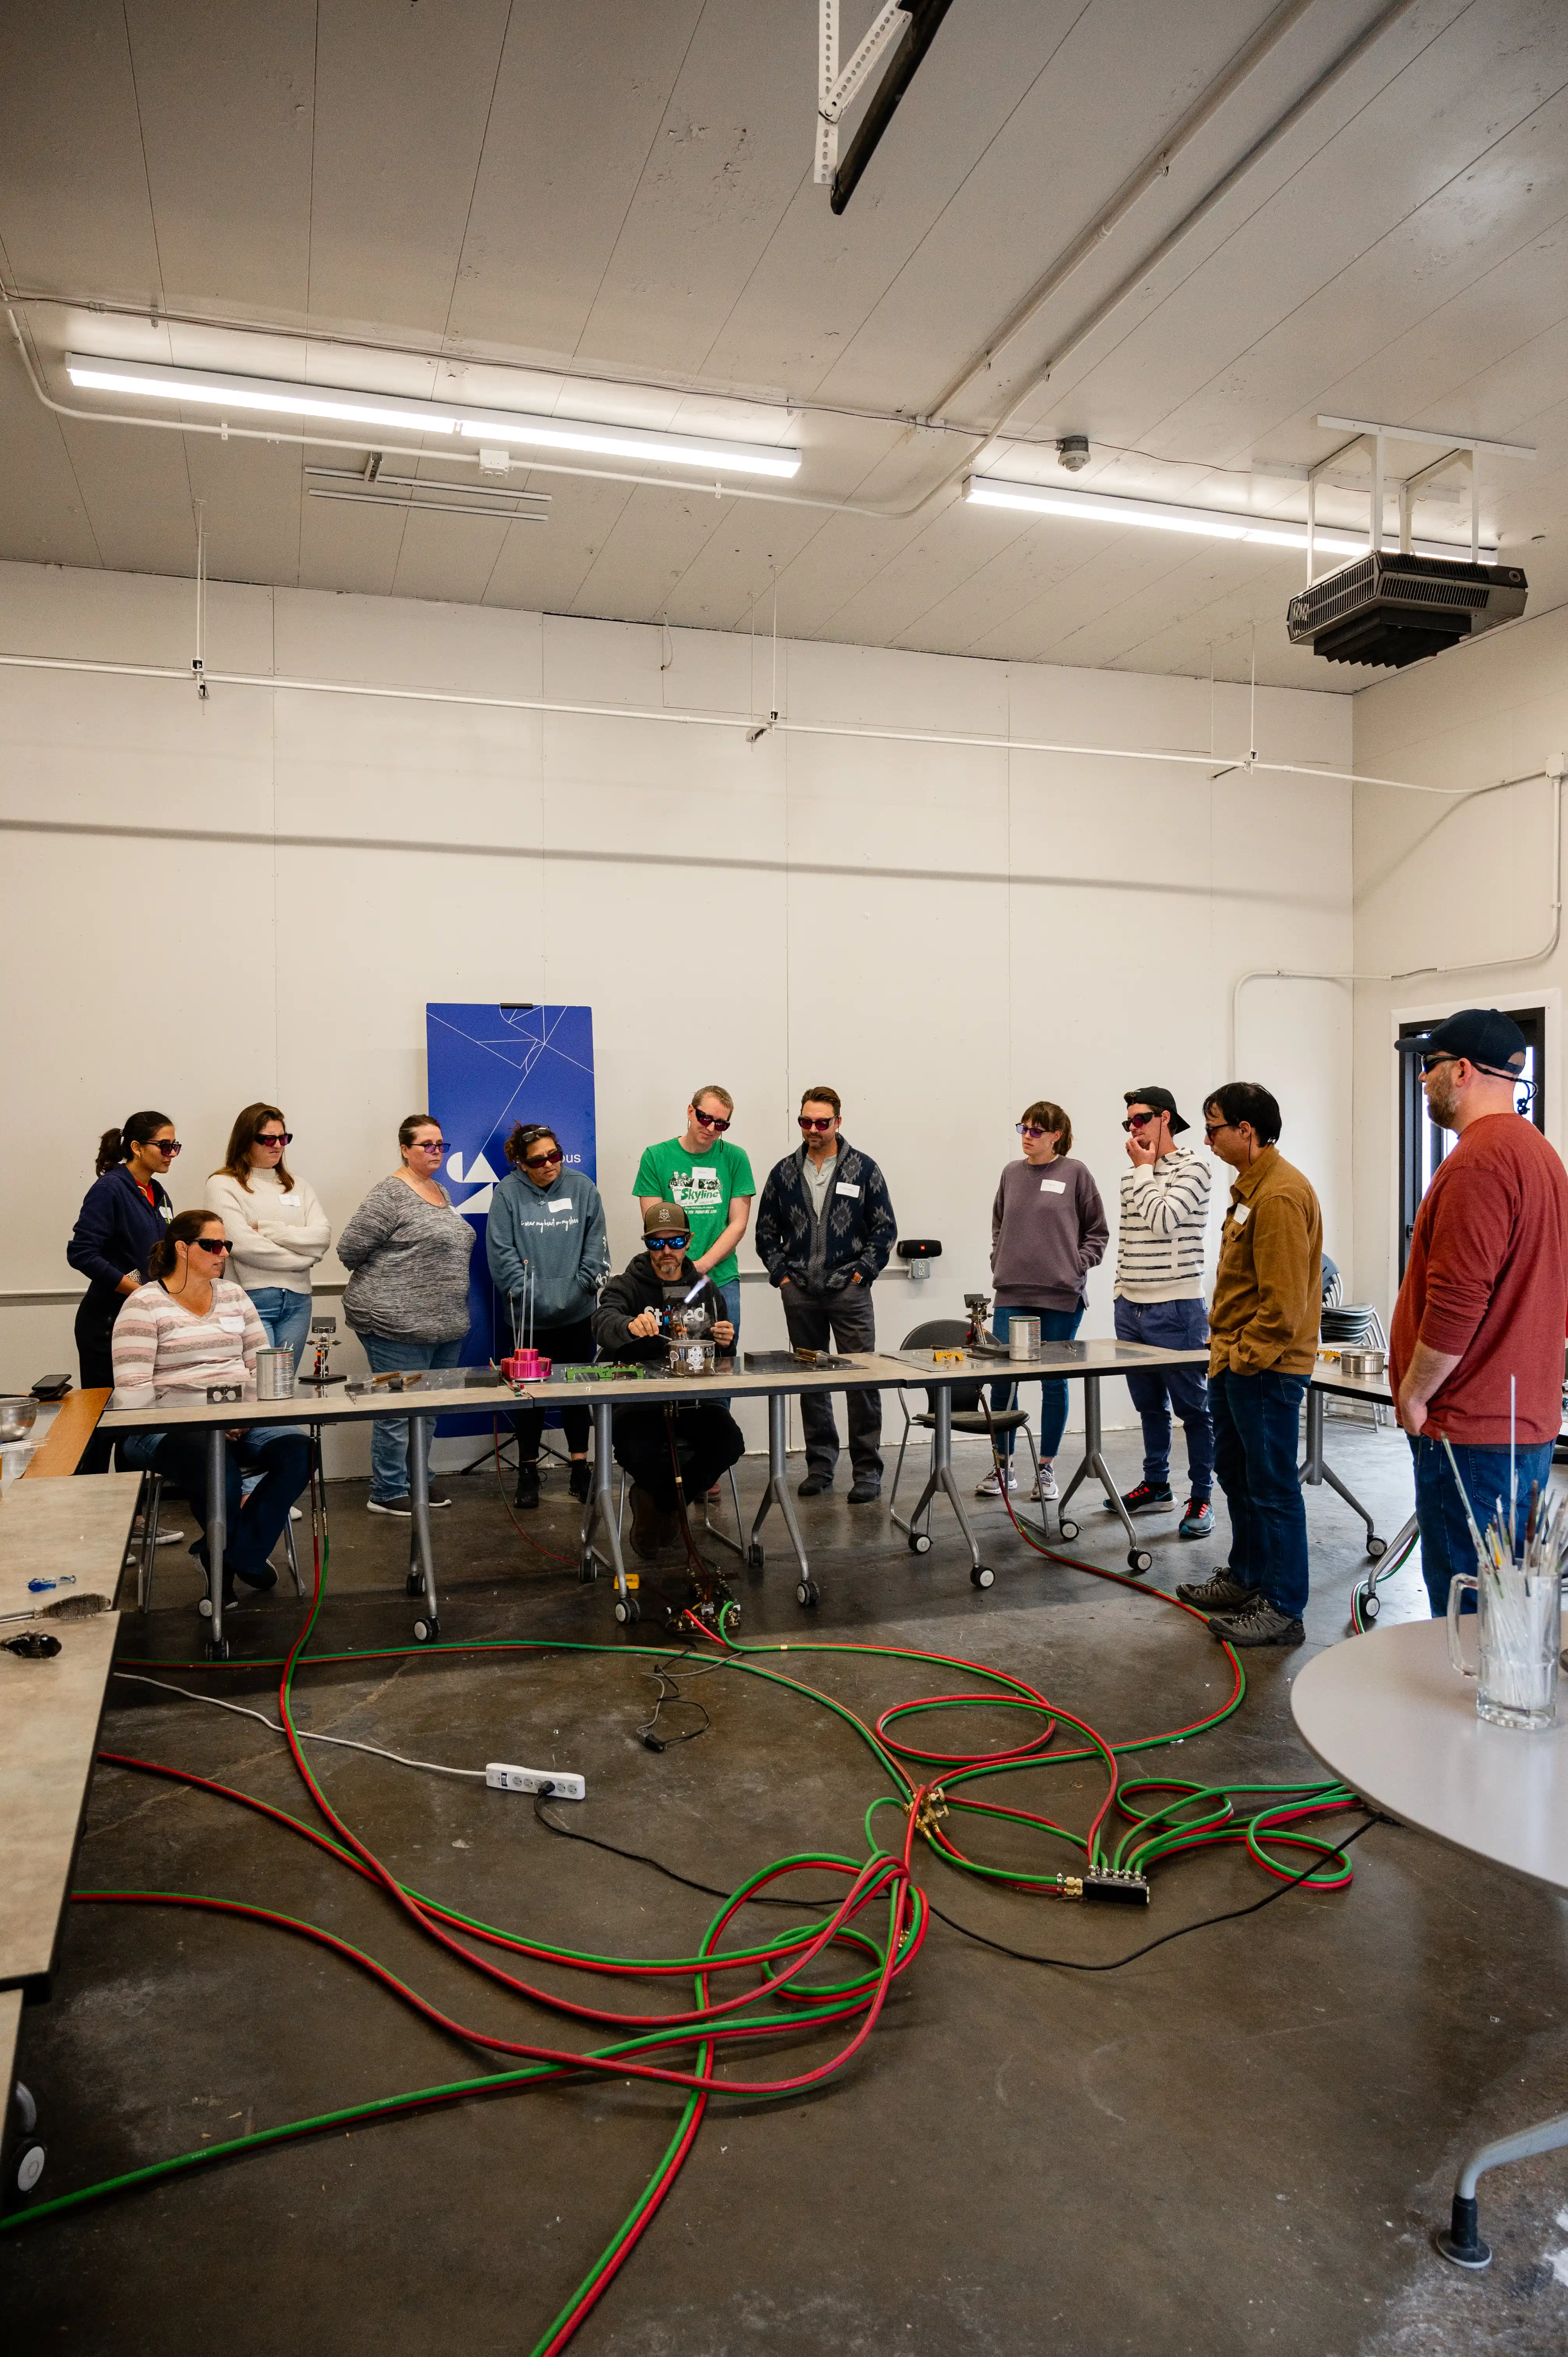 Group of people standing around a table in a workshop environment observing a demonstration or lecture.